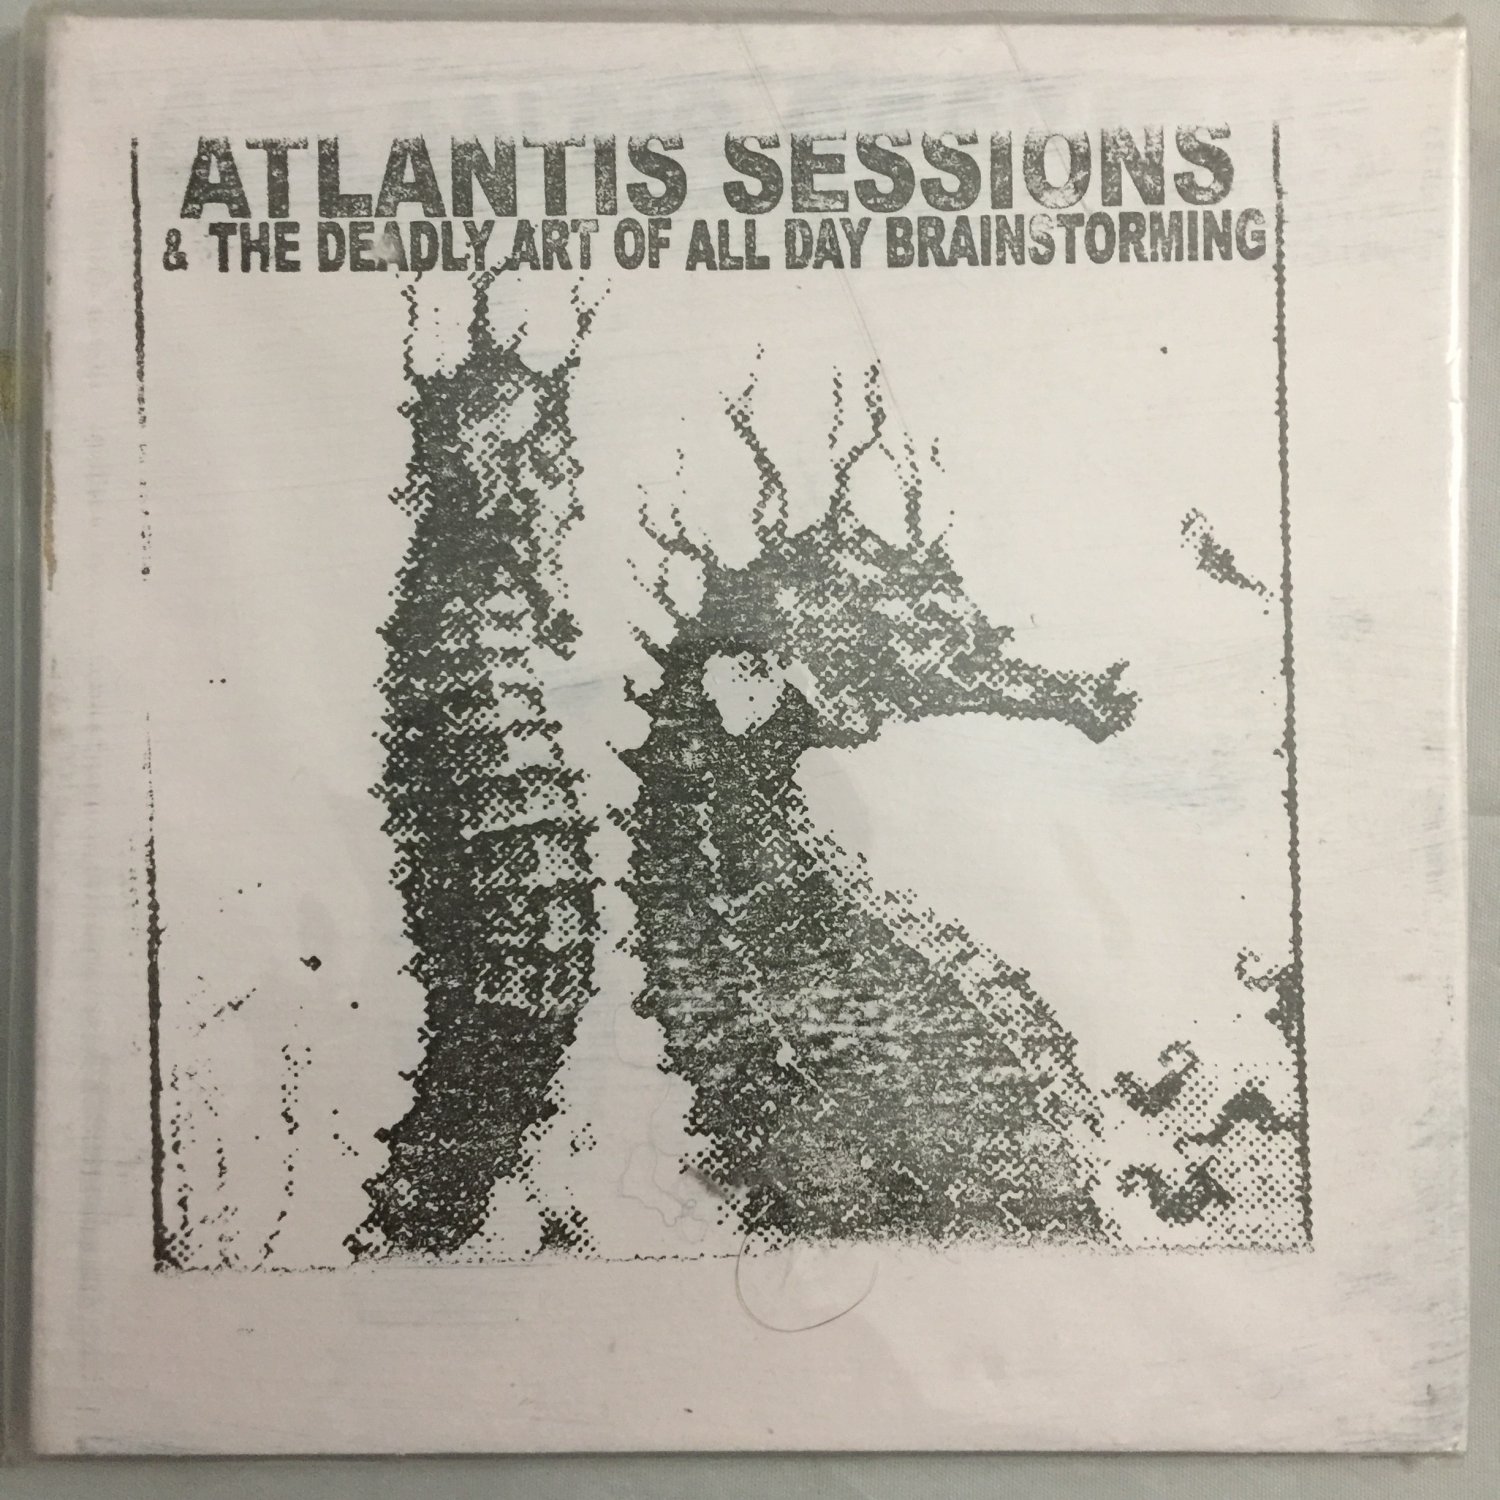 MONS001 - Various - Atlantis Sessions & The Deadly Art Of All Day Brainstorming (CD) MONDRIAN SOUND